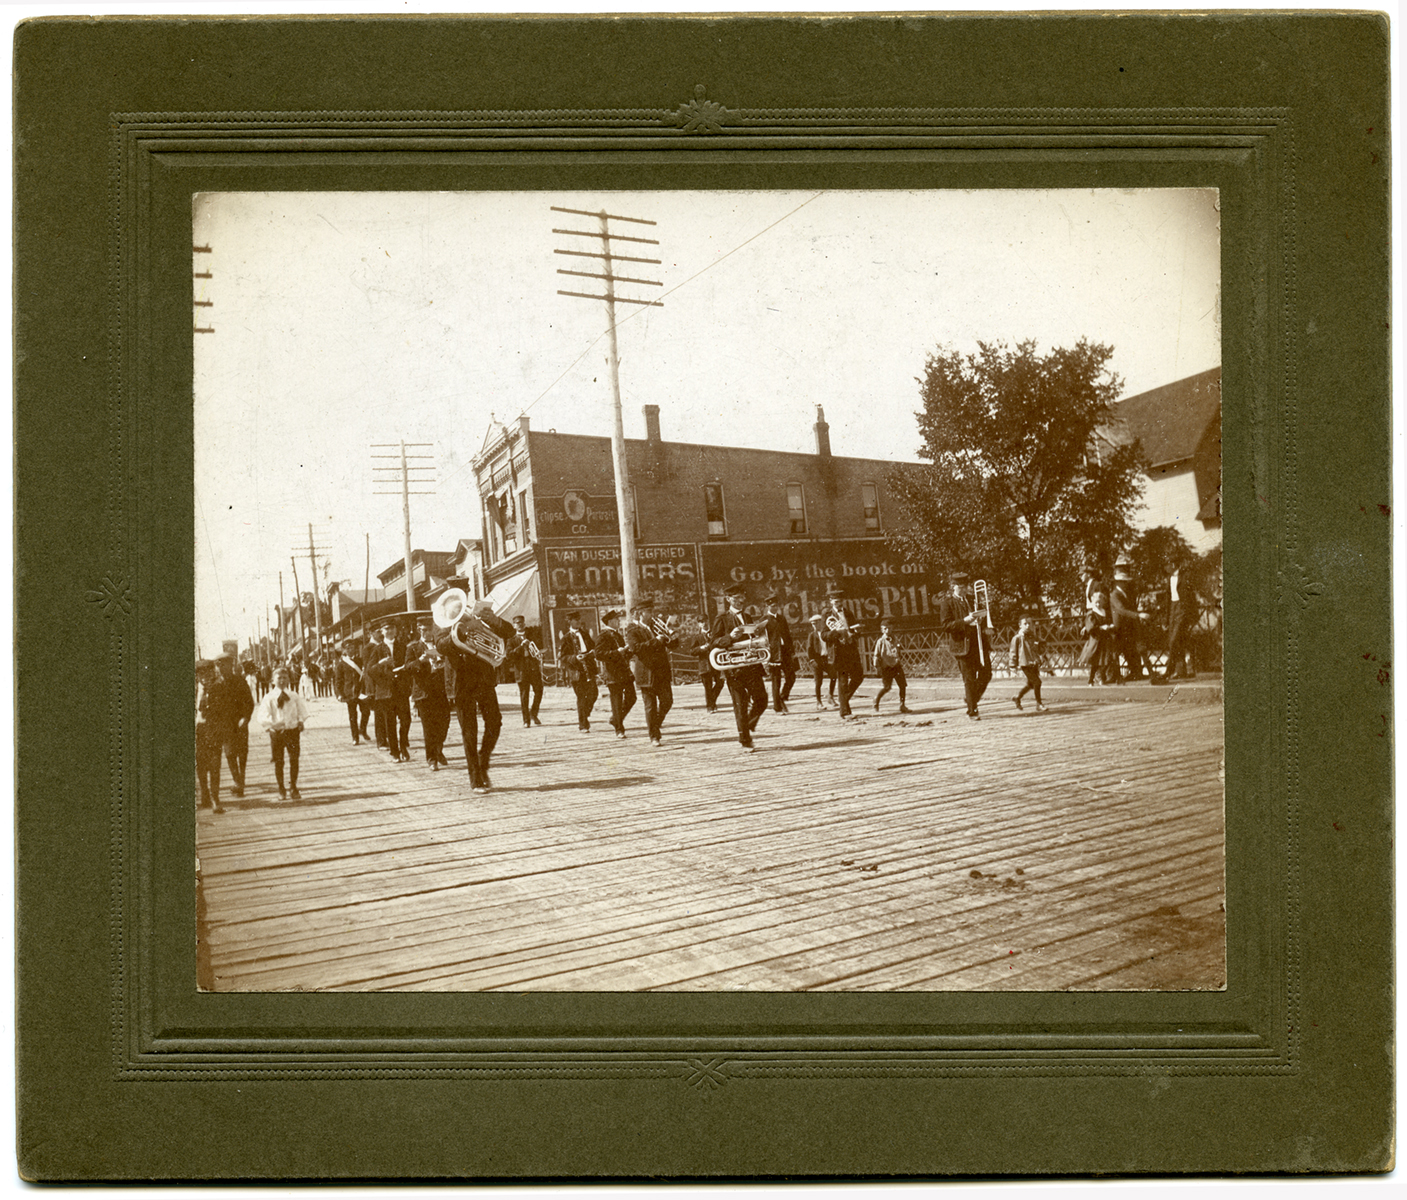  "Labor Day Parade, 5 Sep 1906." List of uniformed companies. "Maple Wood Park." Stamped "Taken by Merle Steenrod, Union City." 